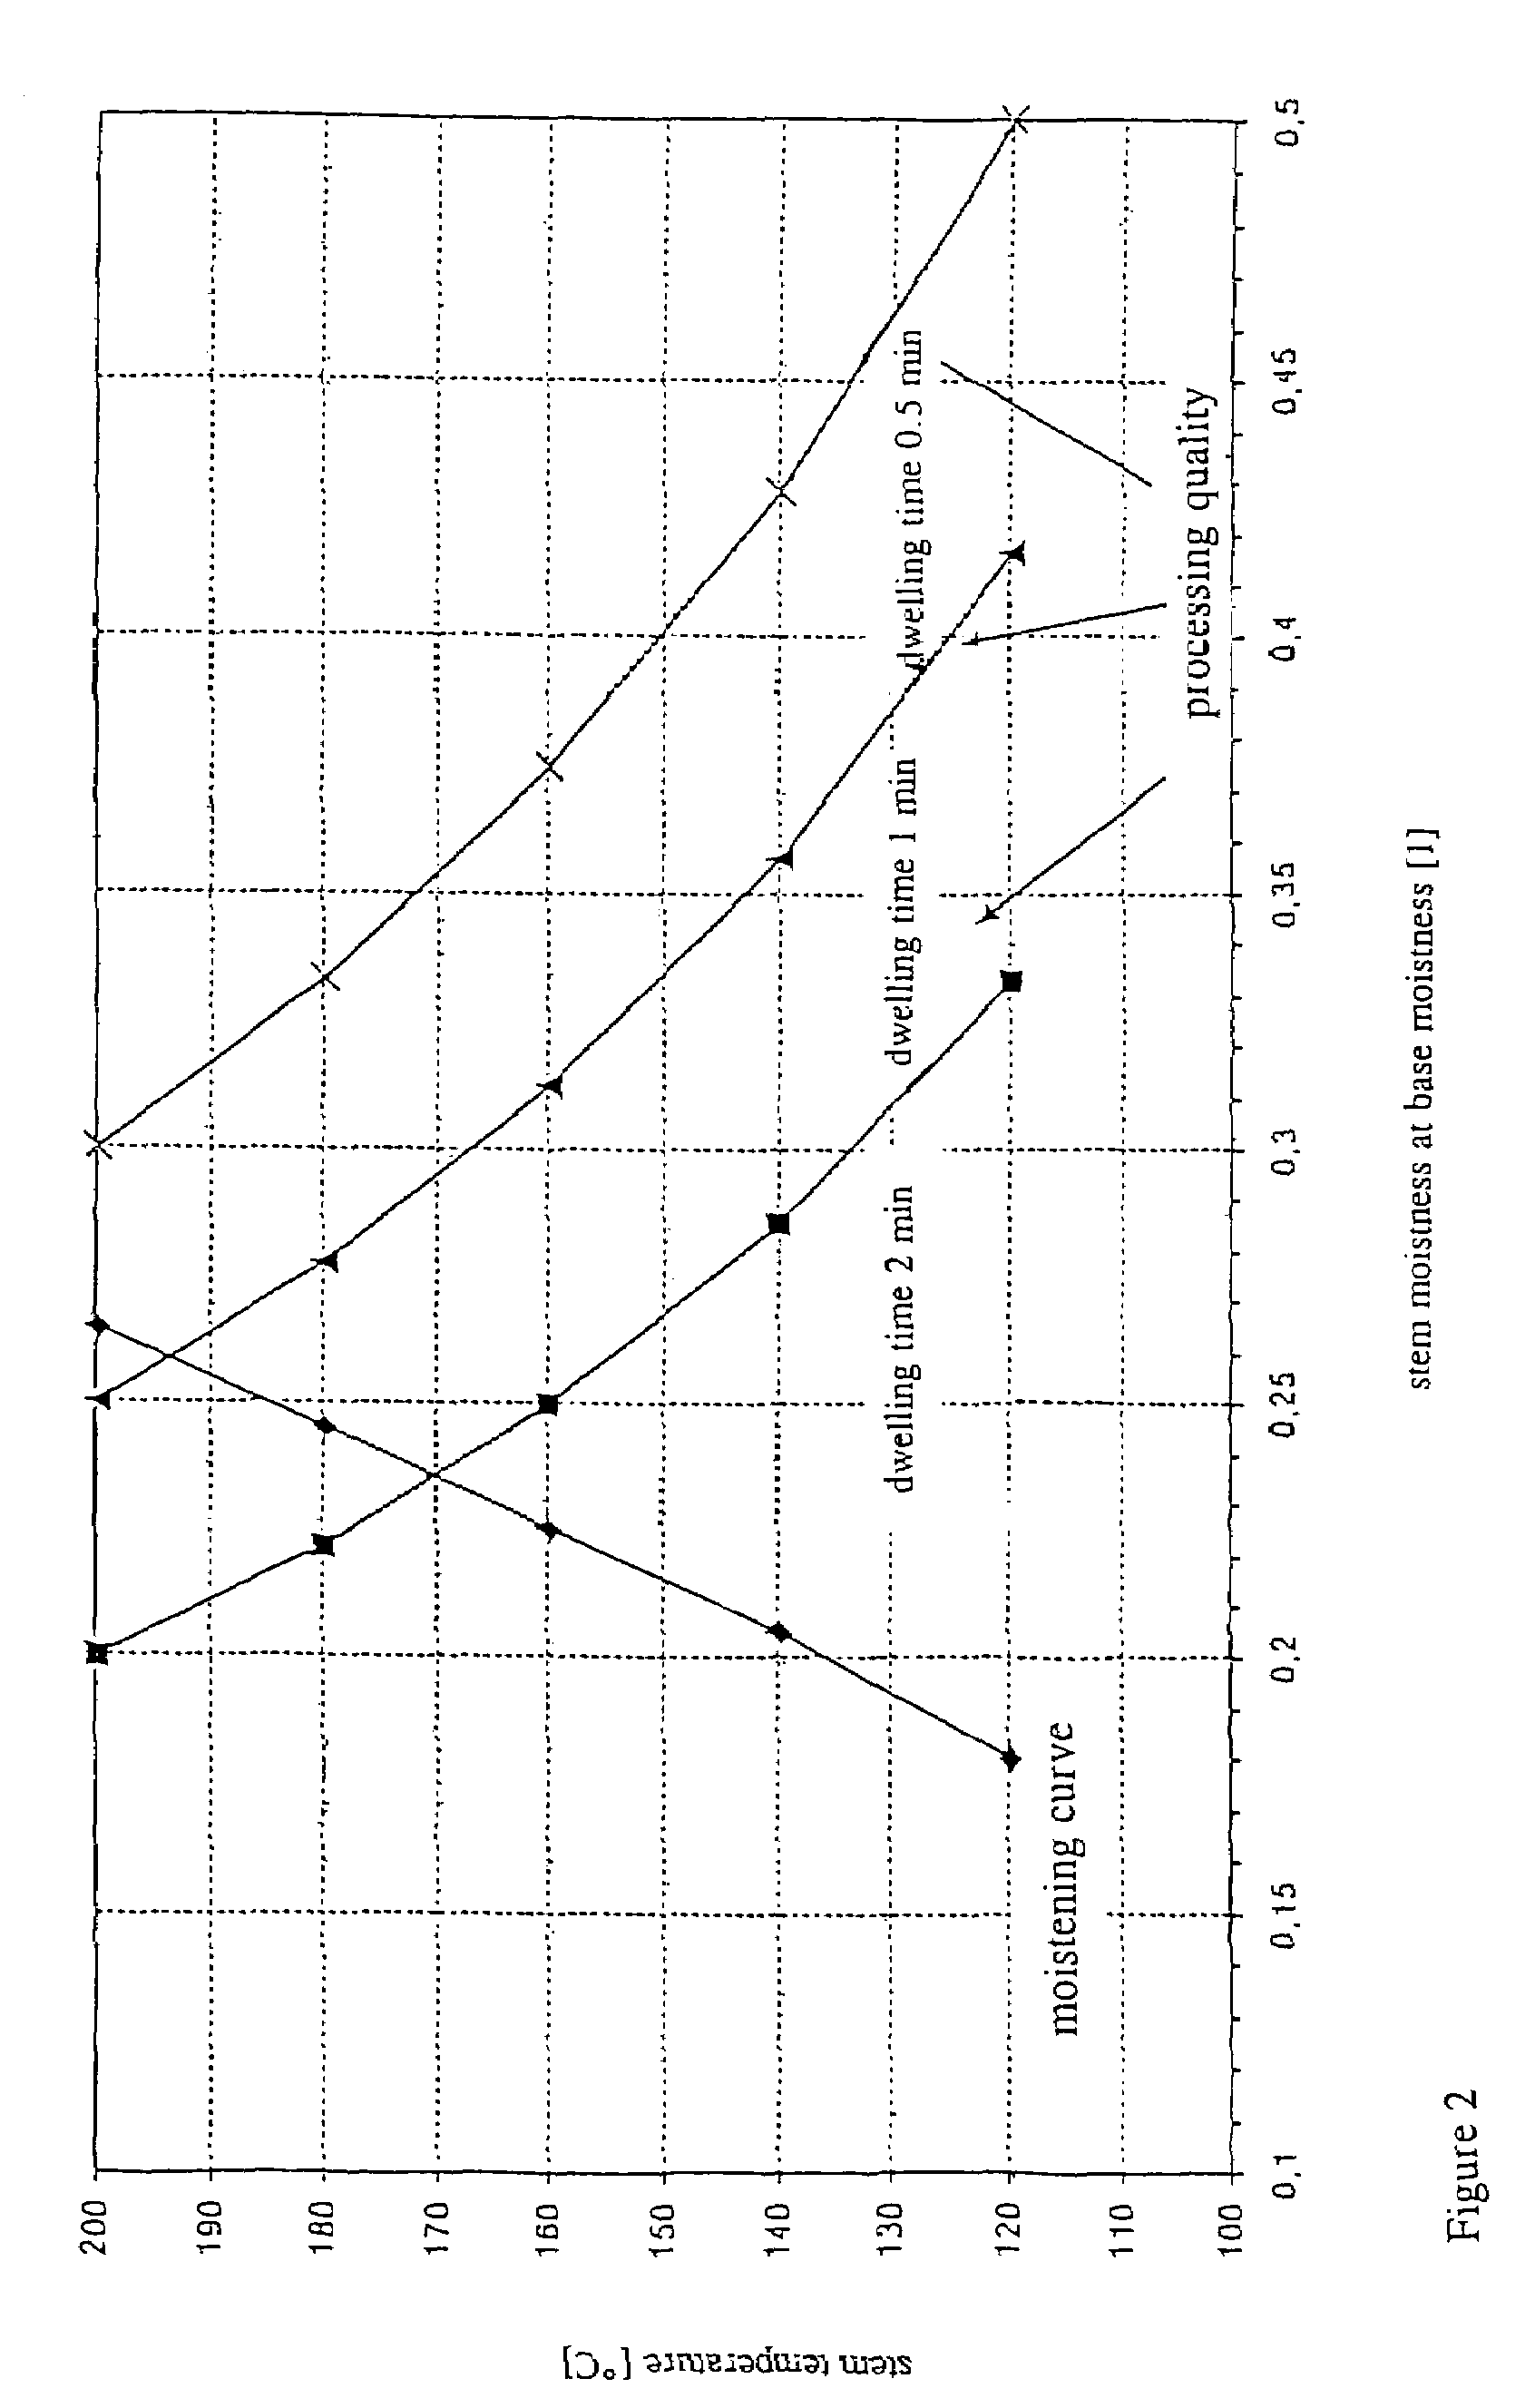 Pressure-conditioning device